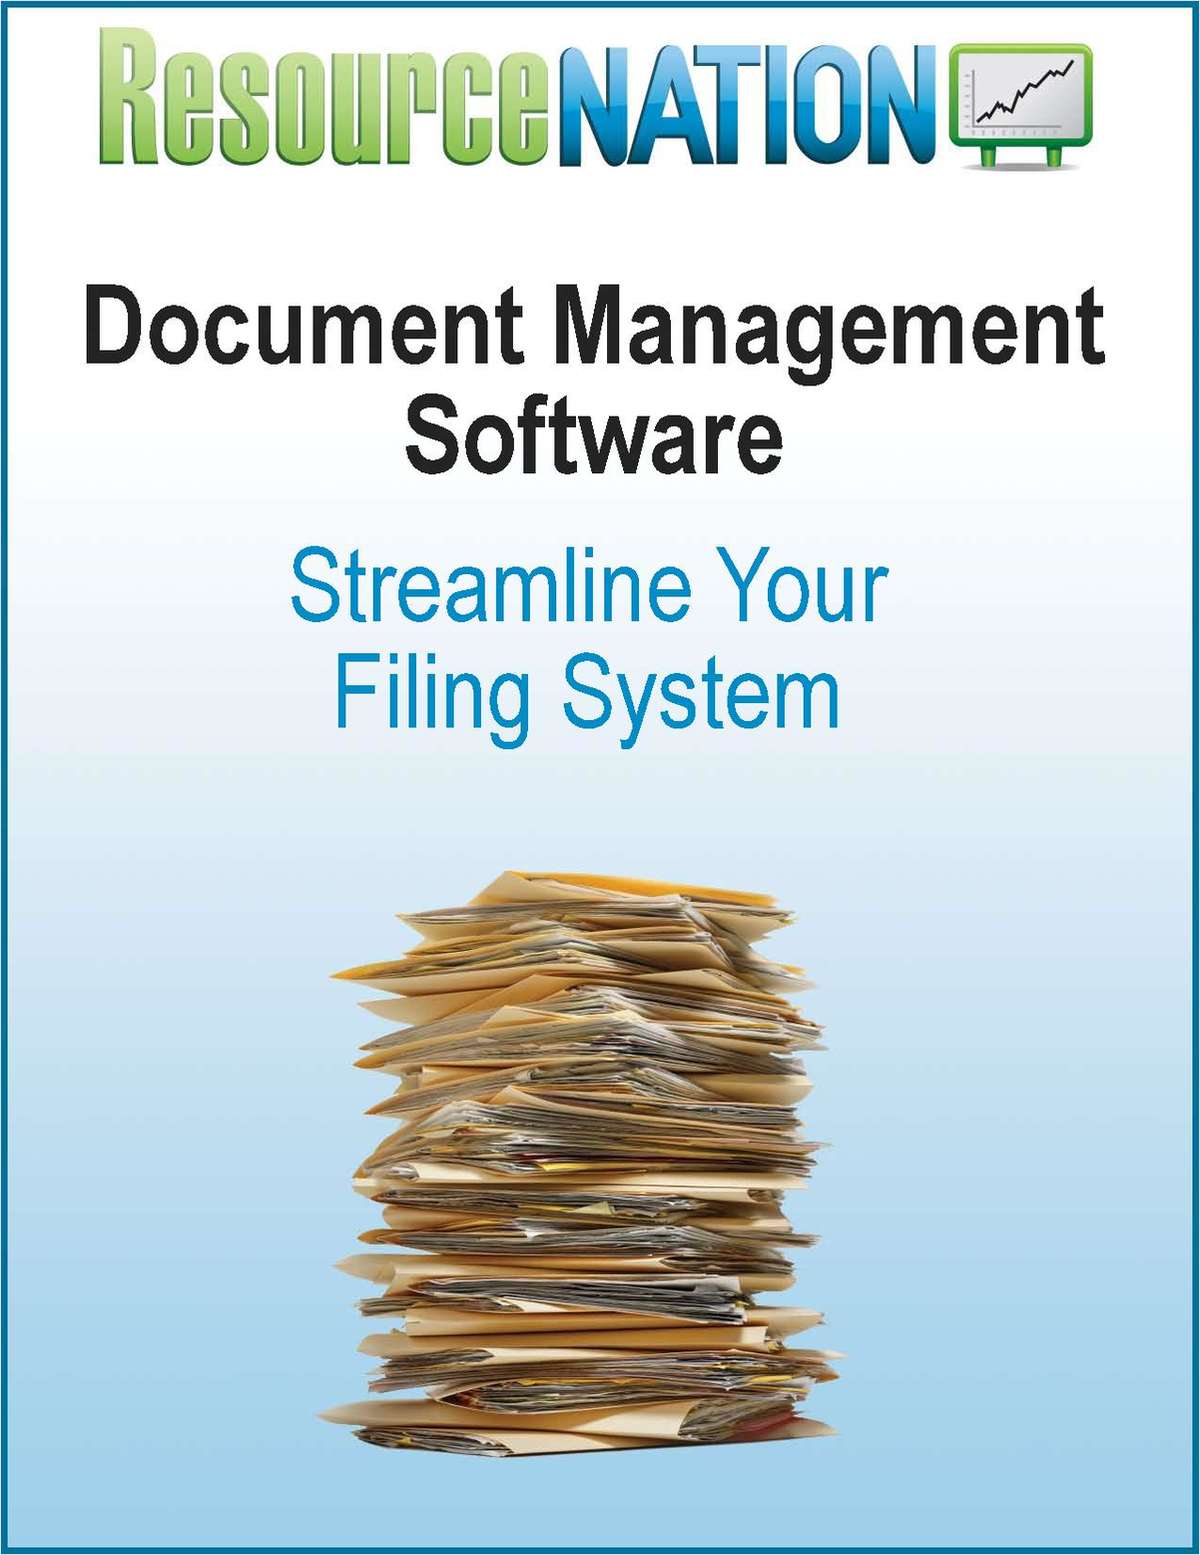 Organize Your Files with Document Management Software